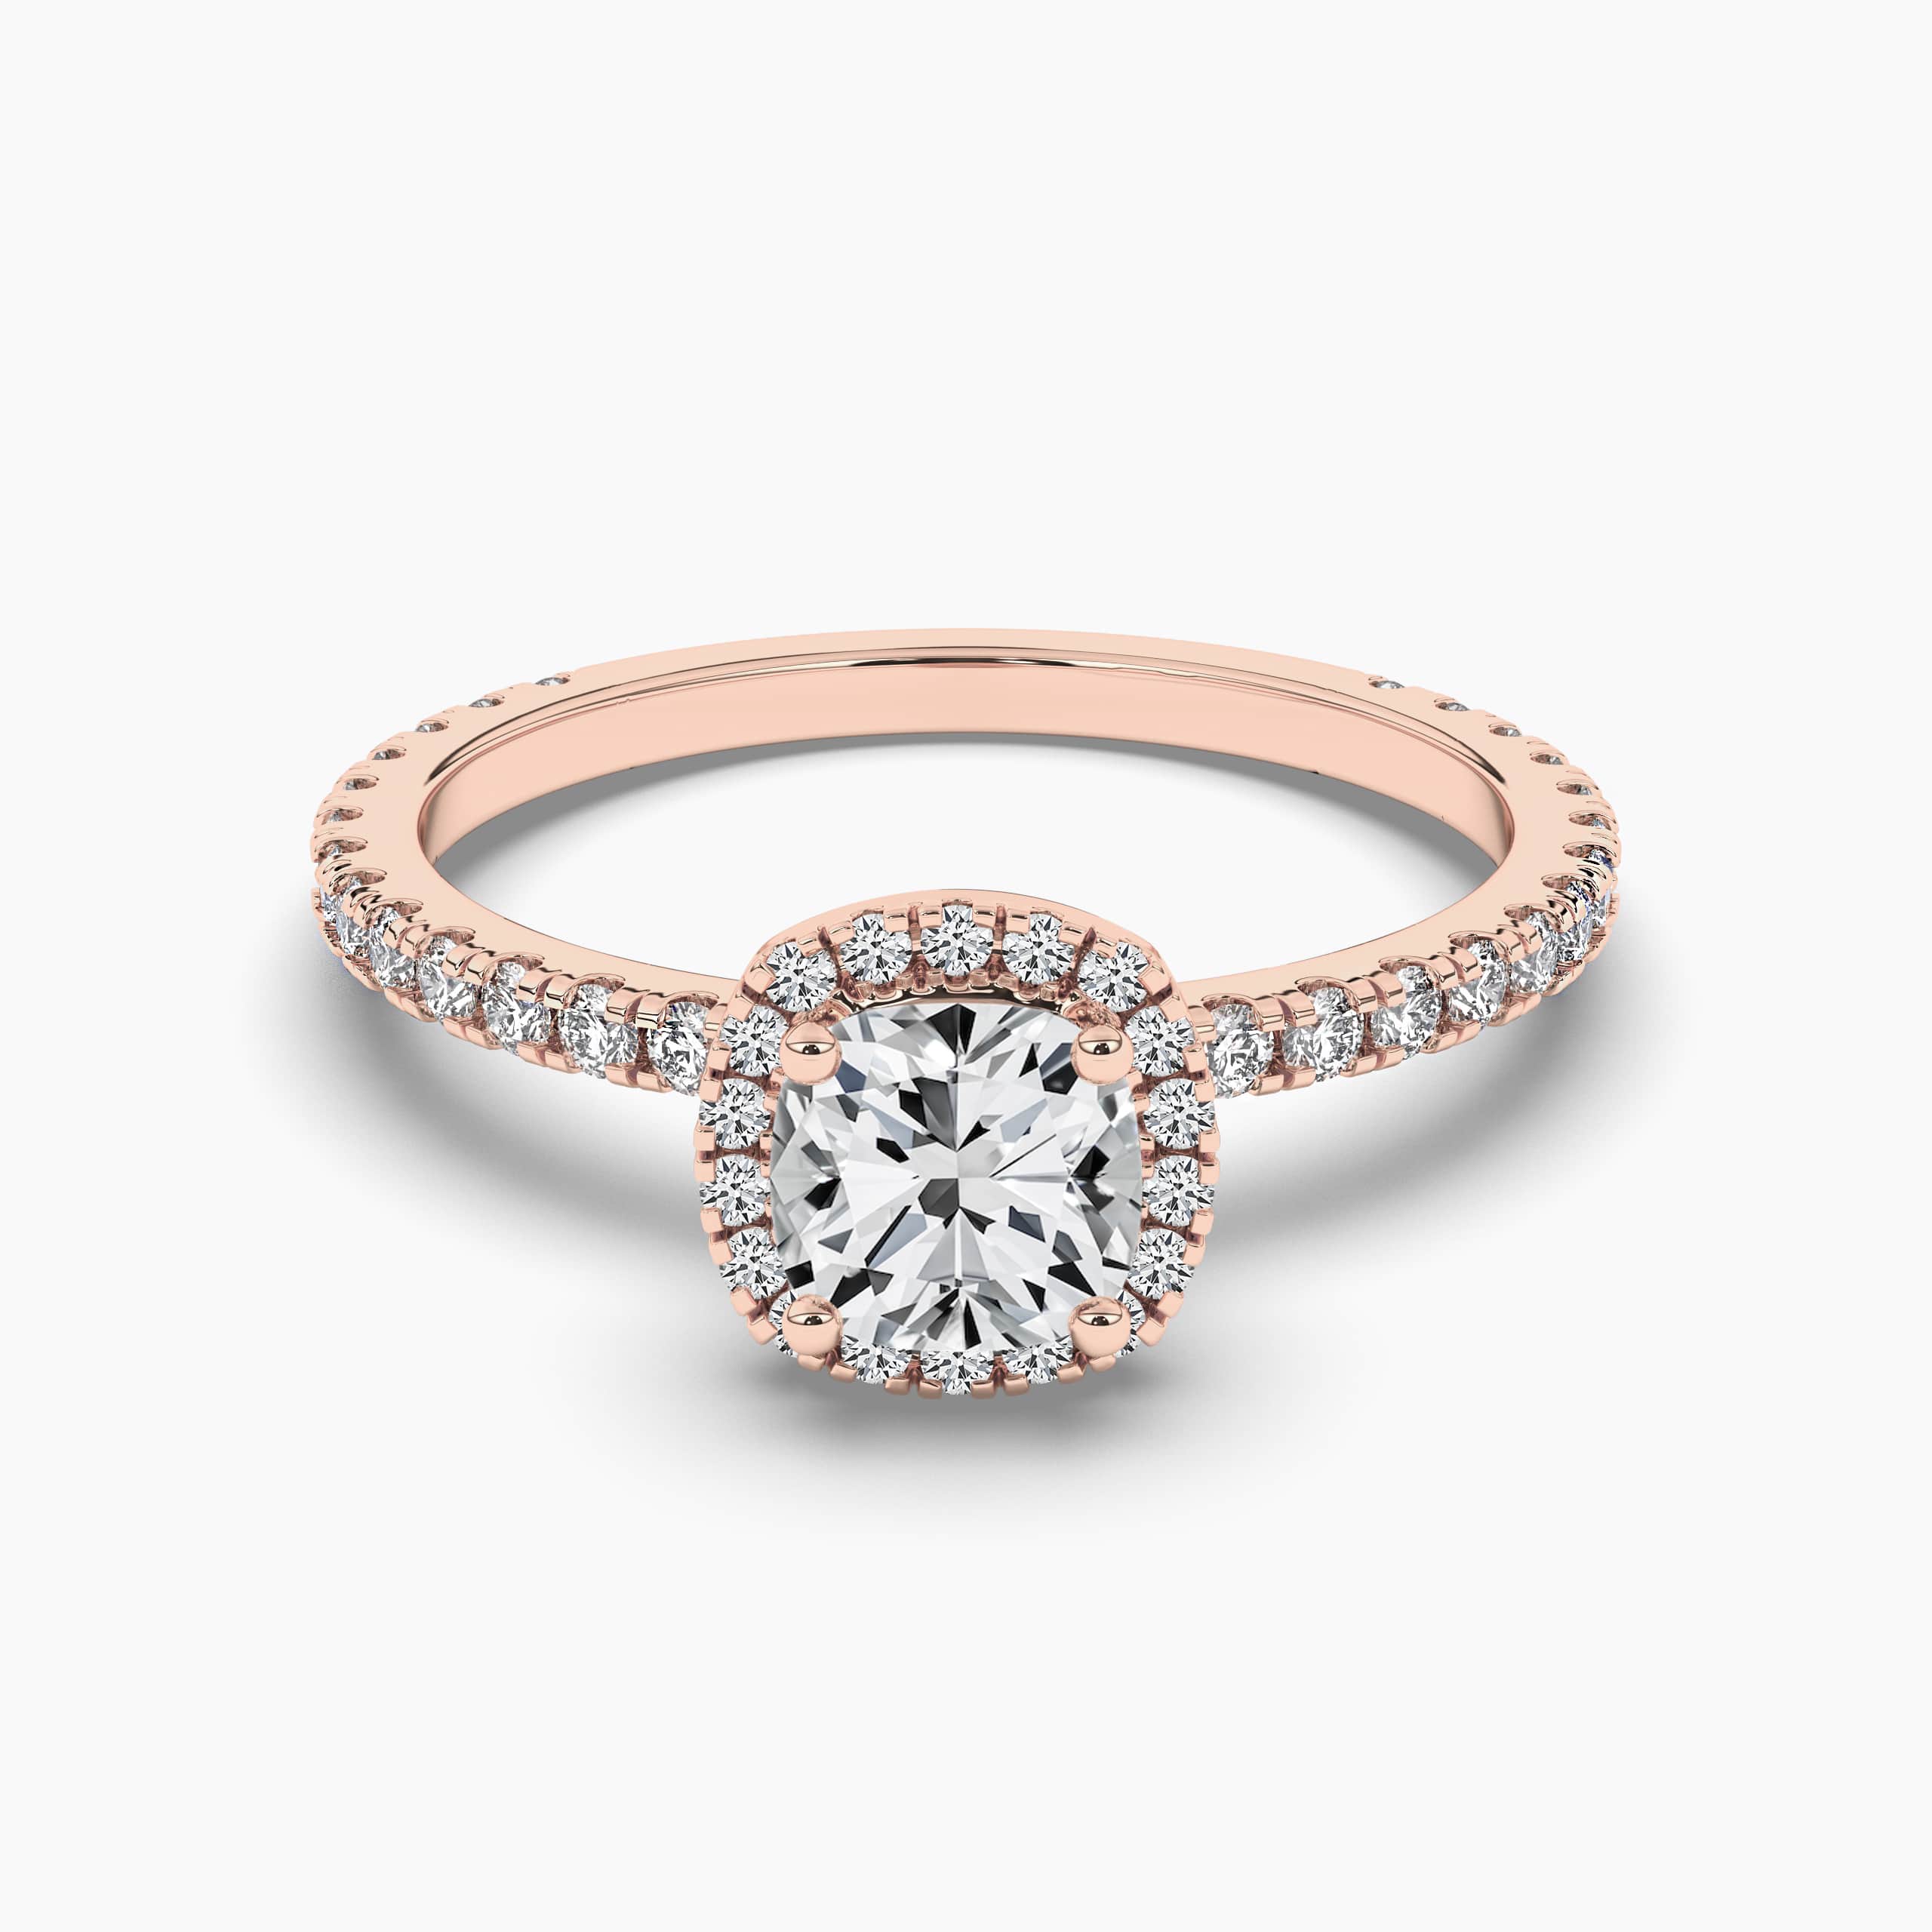 French Pave Halo Diamond Ring